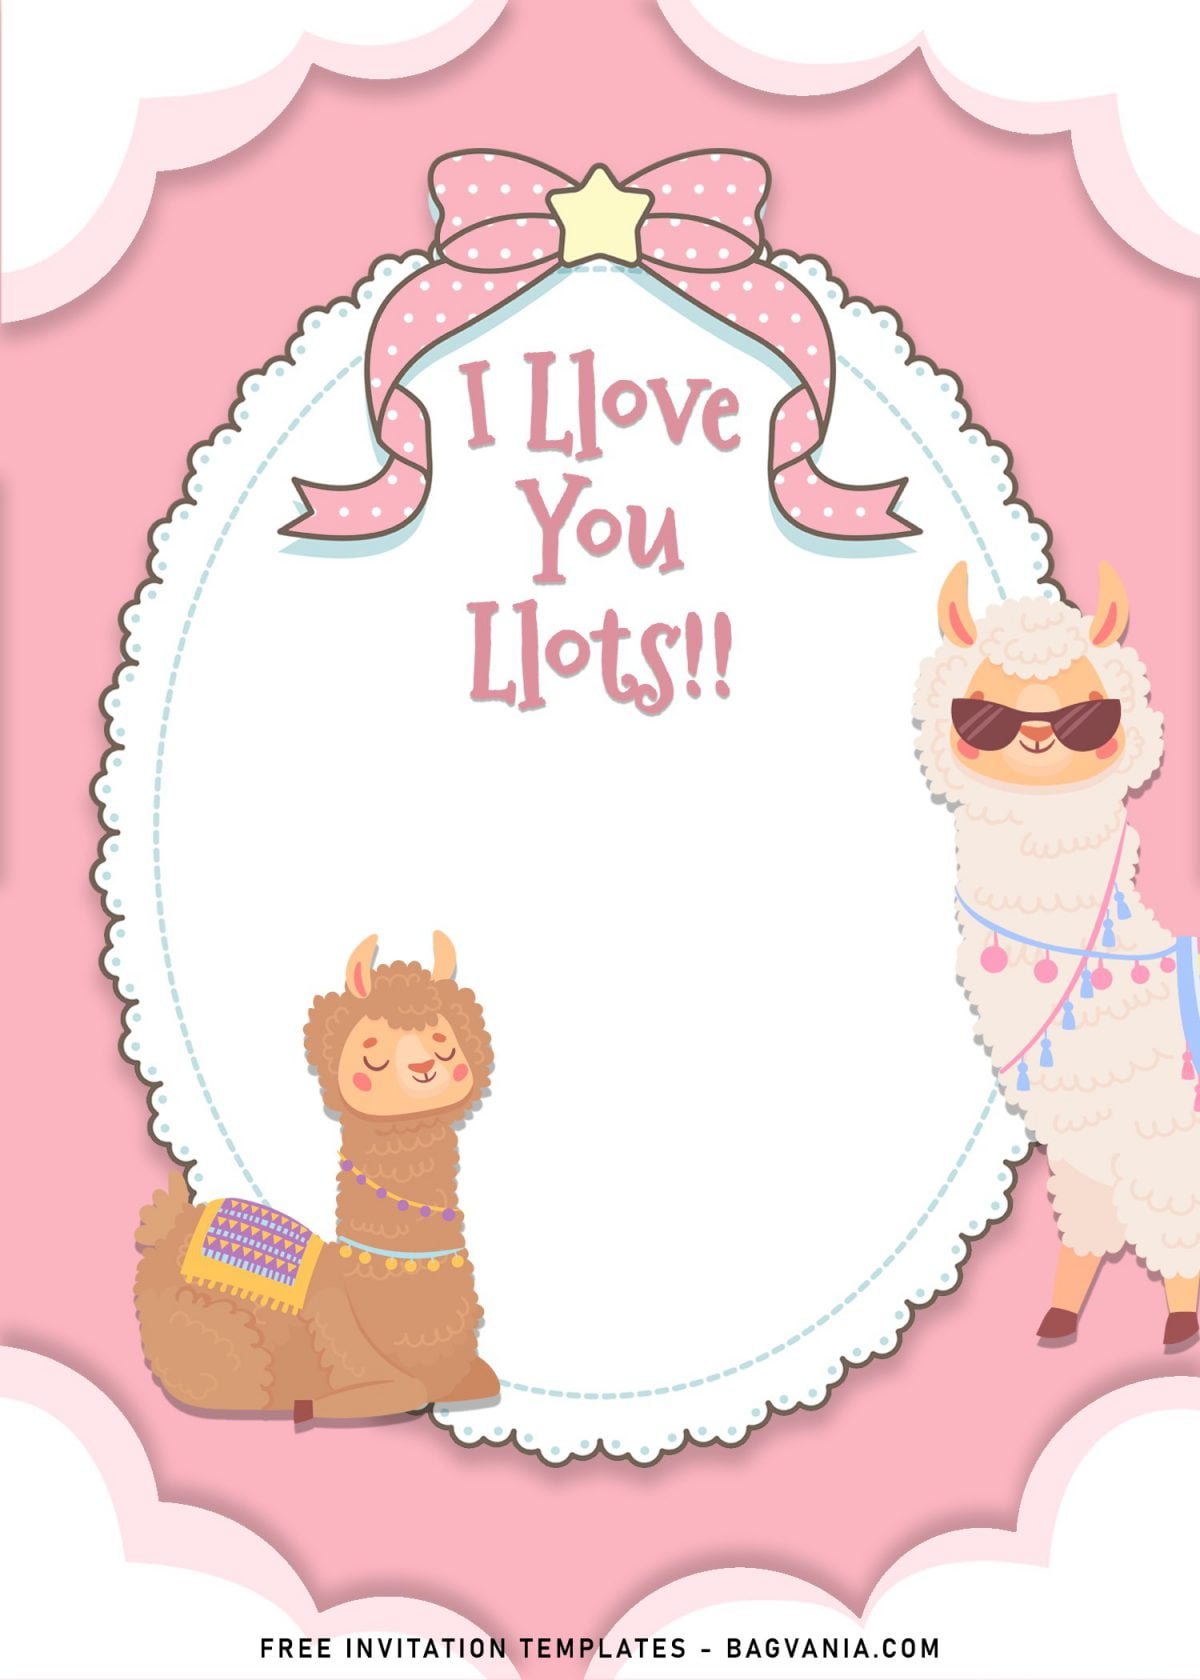 8+ Adorable Llama Birthday Invitation Templates and has white clouds on each border